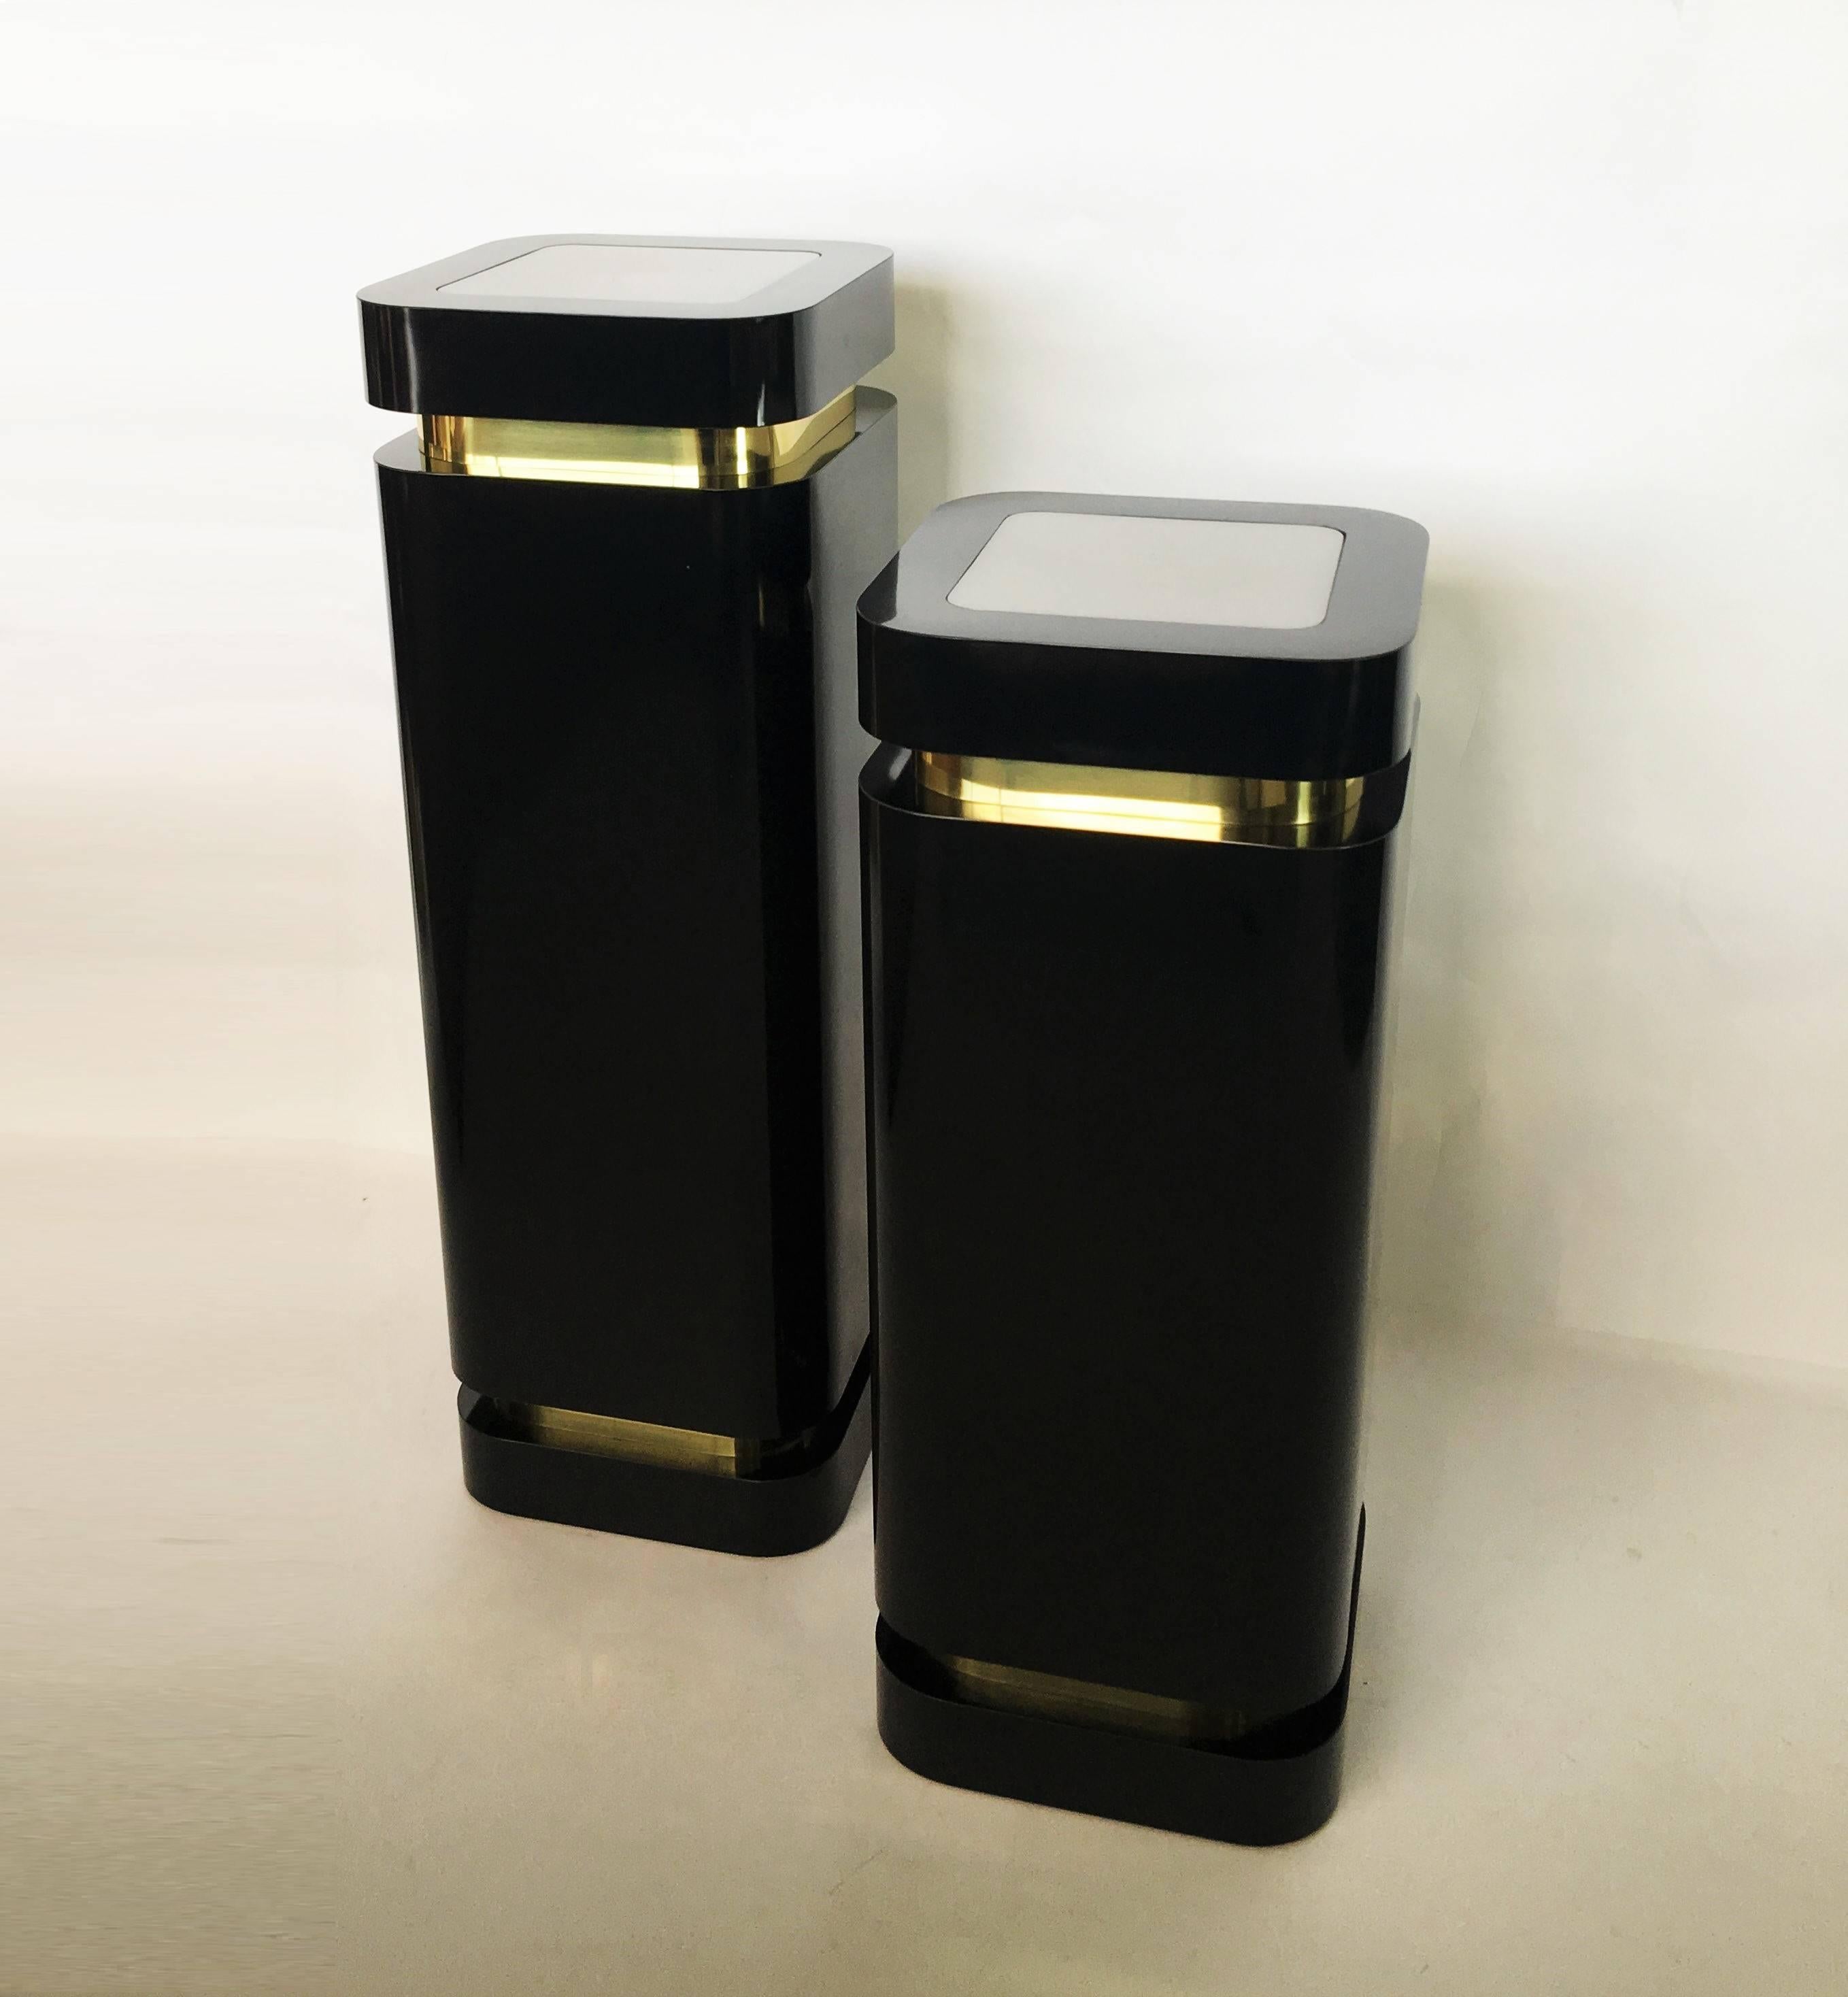 Two unique pedestals in black lacquer with brass trim. The perfect height to display sculptures. Lighted. One is slightly higher than the other. 

Tall measures: 42 in. H x 14 in. W x 14 in. D
Small measures: 36 in. H x 14 in. W x 14 in. D.